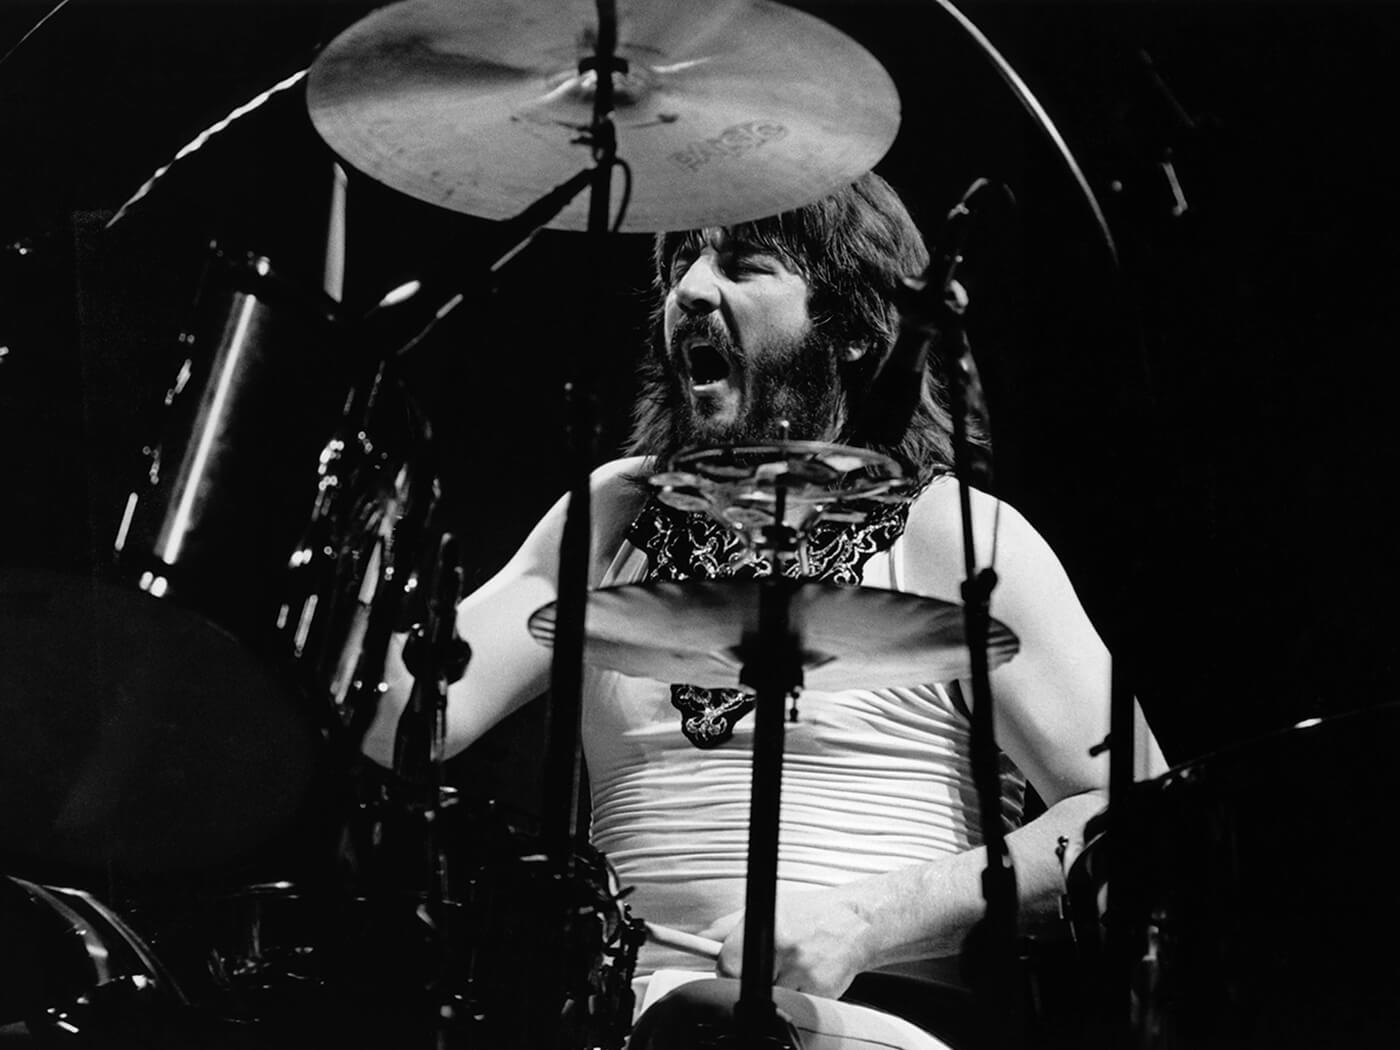 John Bonham performing with Led Zeppelin in 1977, photo by Richard E. Aaron/Redferns via Getty Images